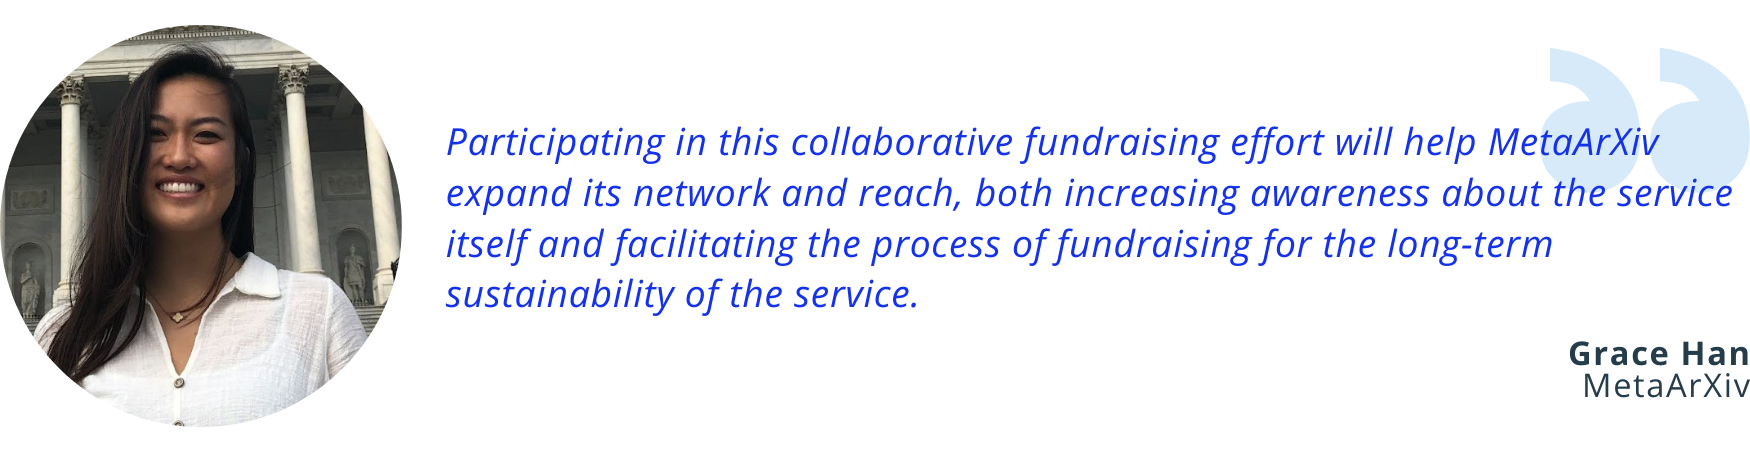 Image of a quote from Grace Han of MetaArXiv: “Participating in this collaborative fundraising effort will help MetaArXiv expand its network and reach, both increasing awareness about the service itself and facilitating the process of fundraising for the long-term sustainability of the service.”